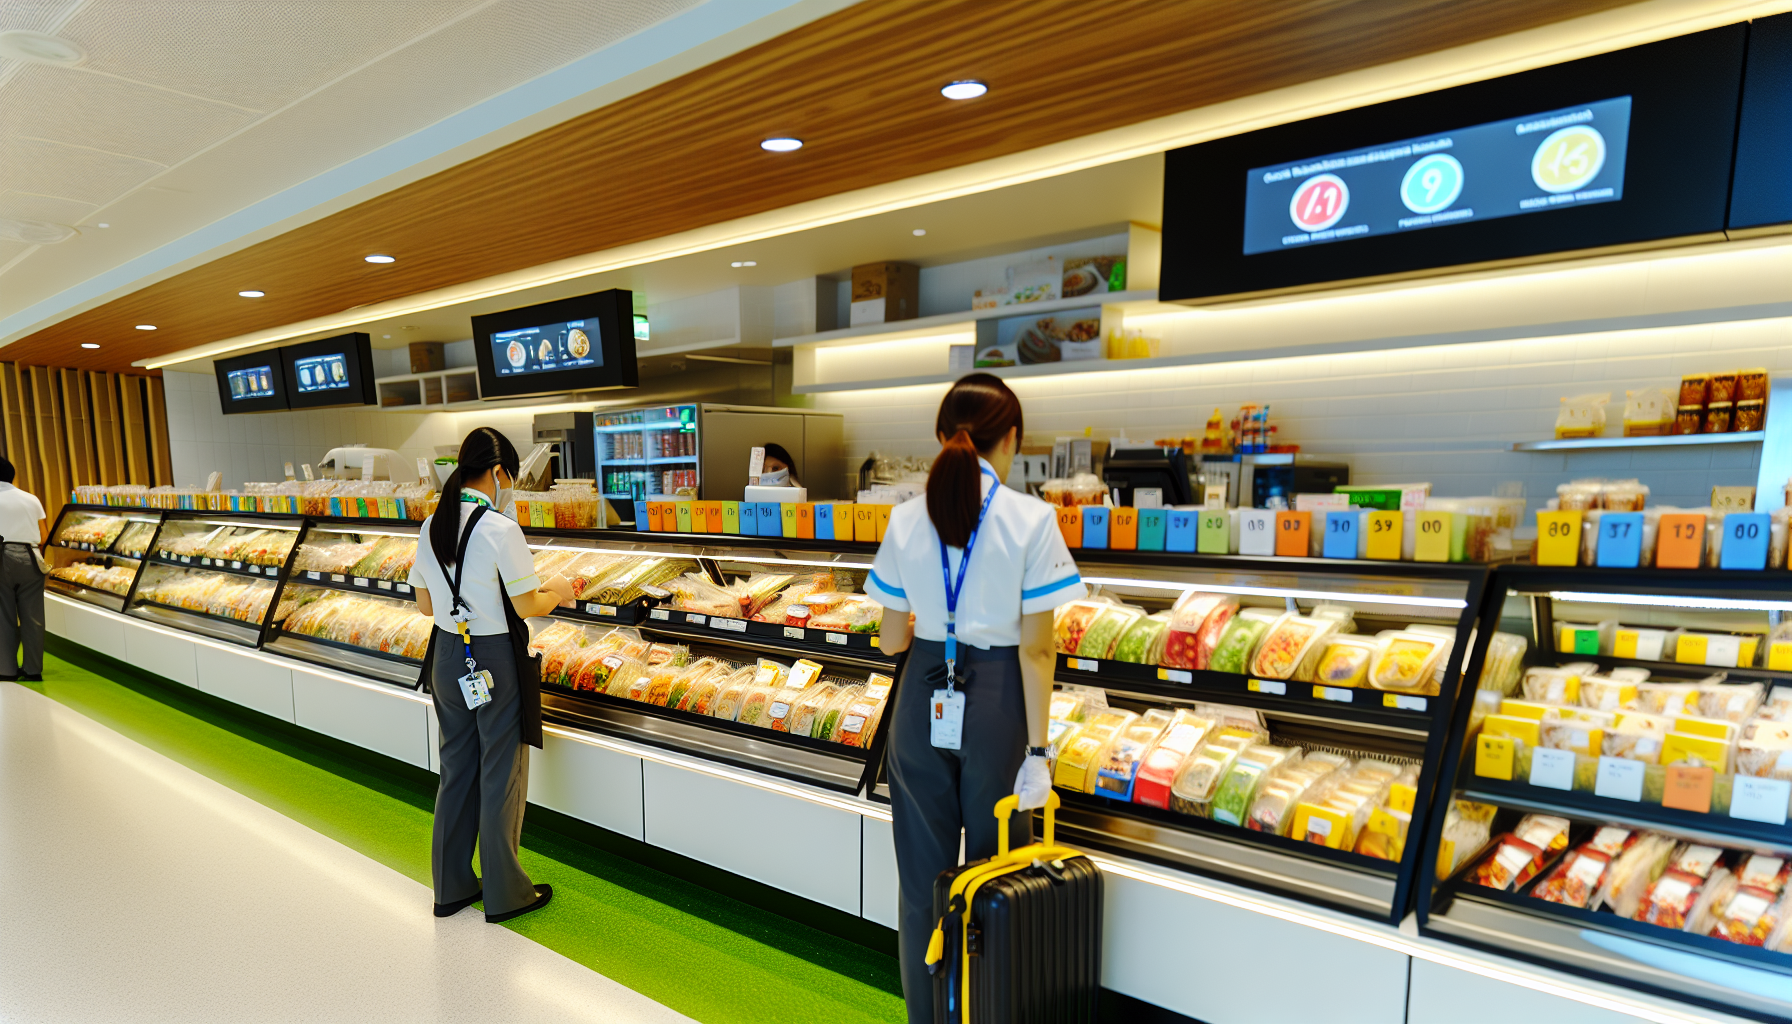 Grab-and-go options in a hospital retail space